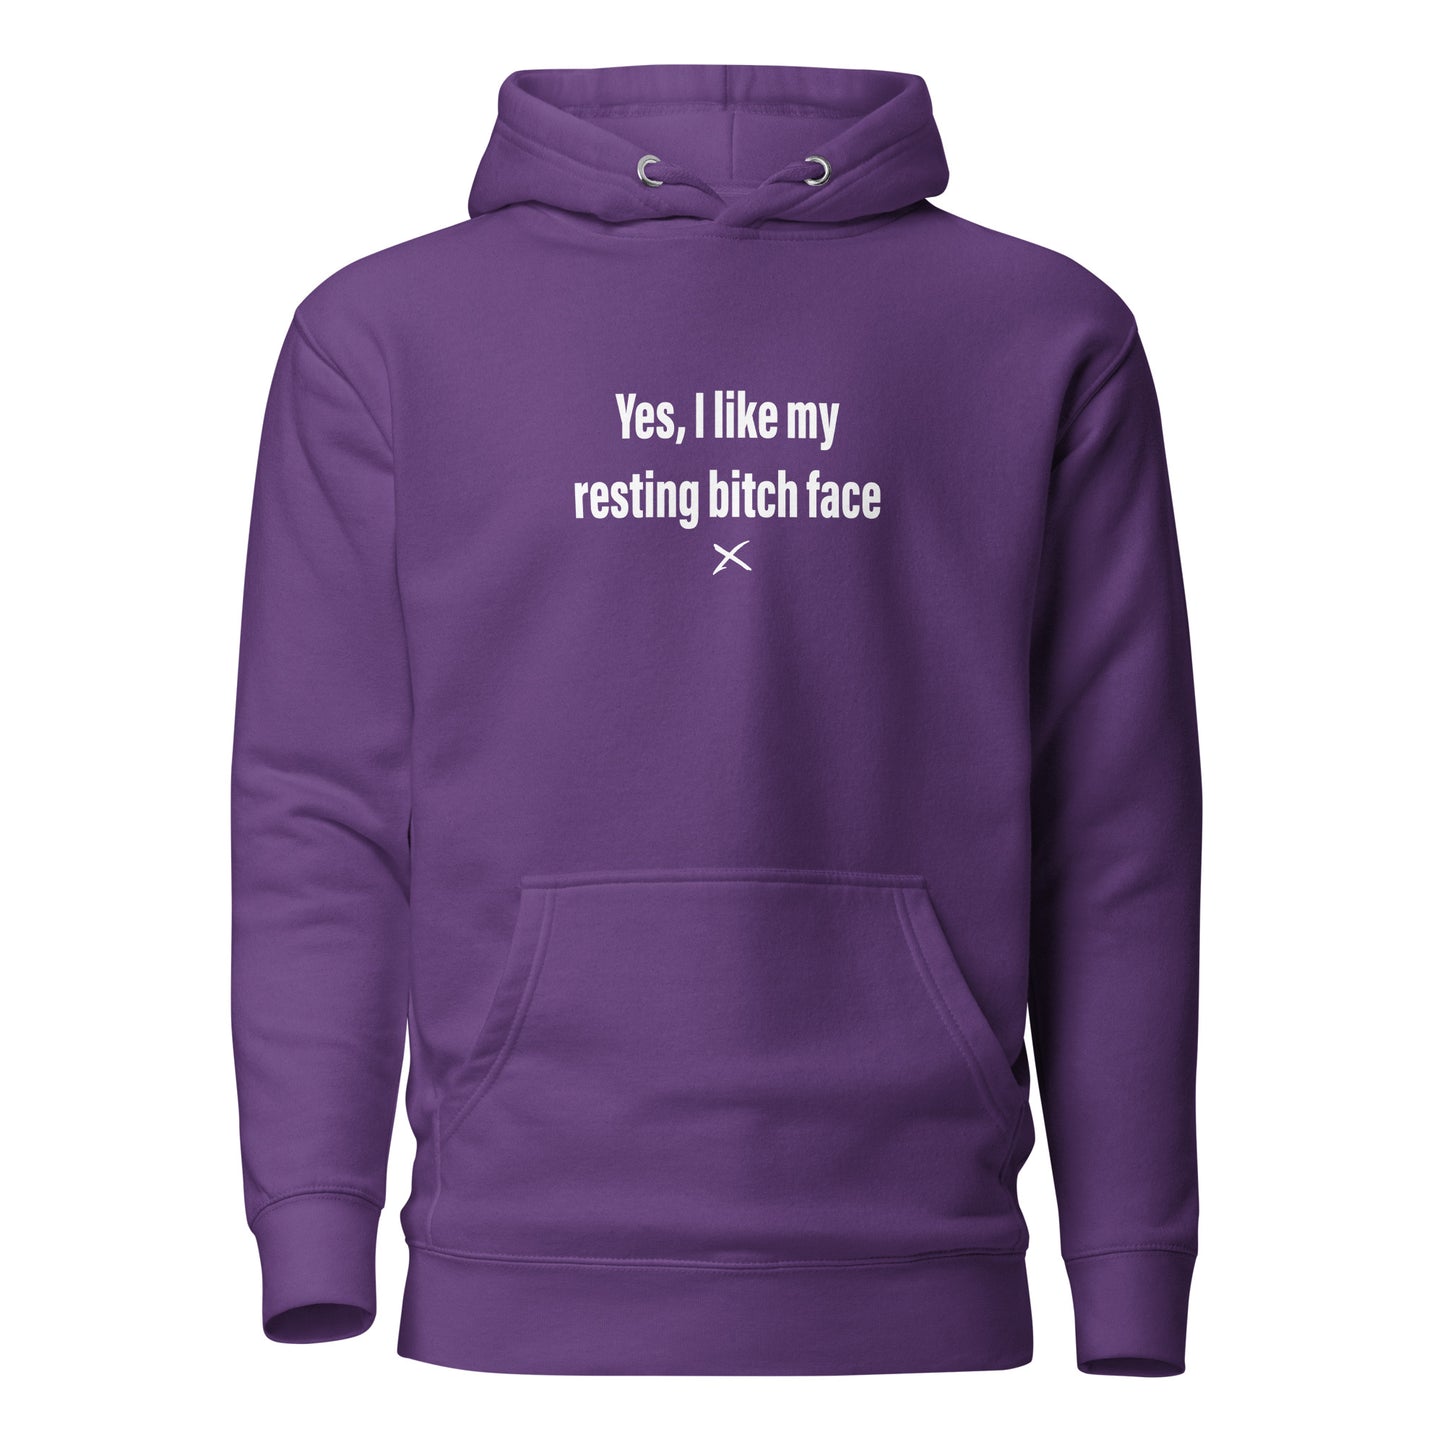 Yes, I like my resting bitch face - Hoodie